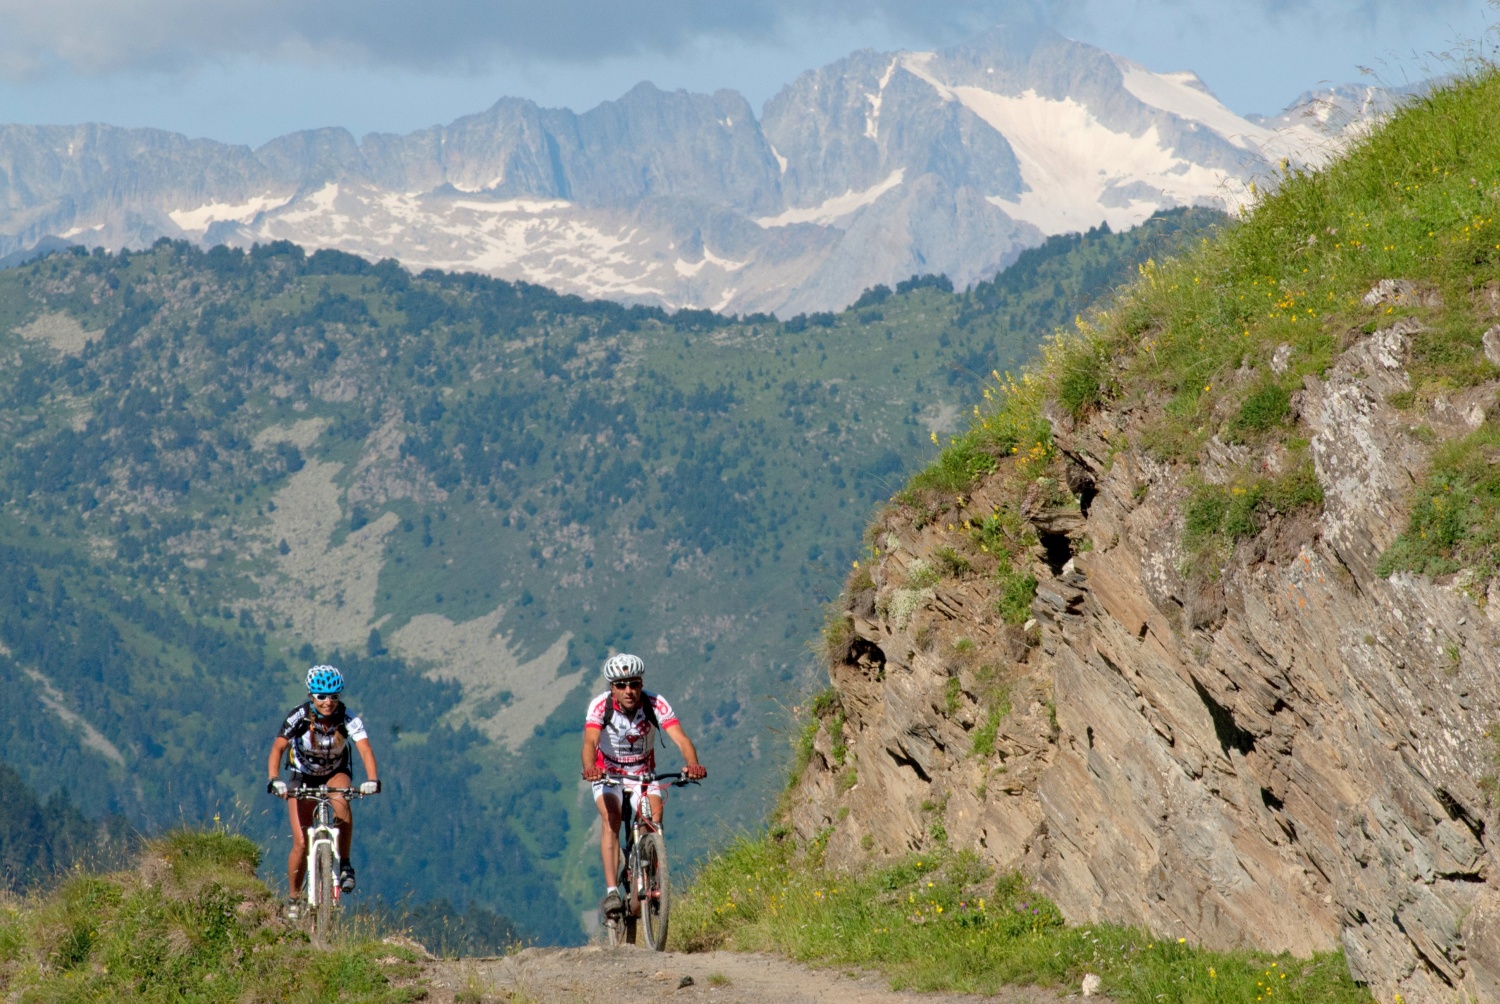 Two cyclists riding along rocky path with mountains in background - Pedals de Foc, Catalonia